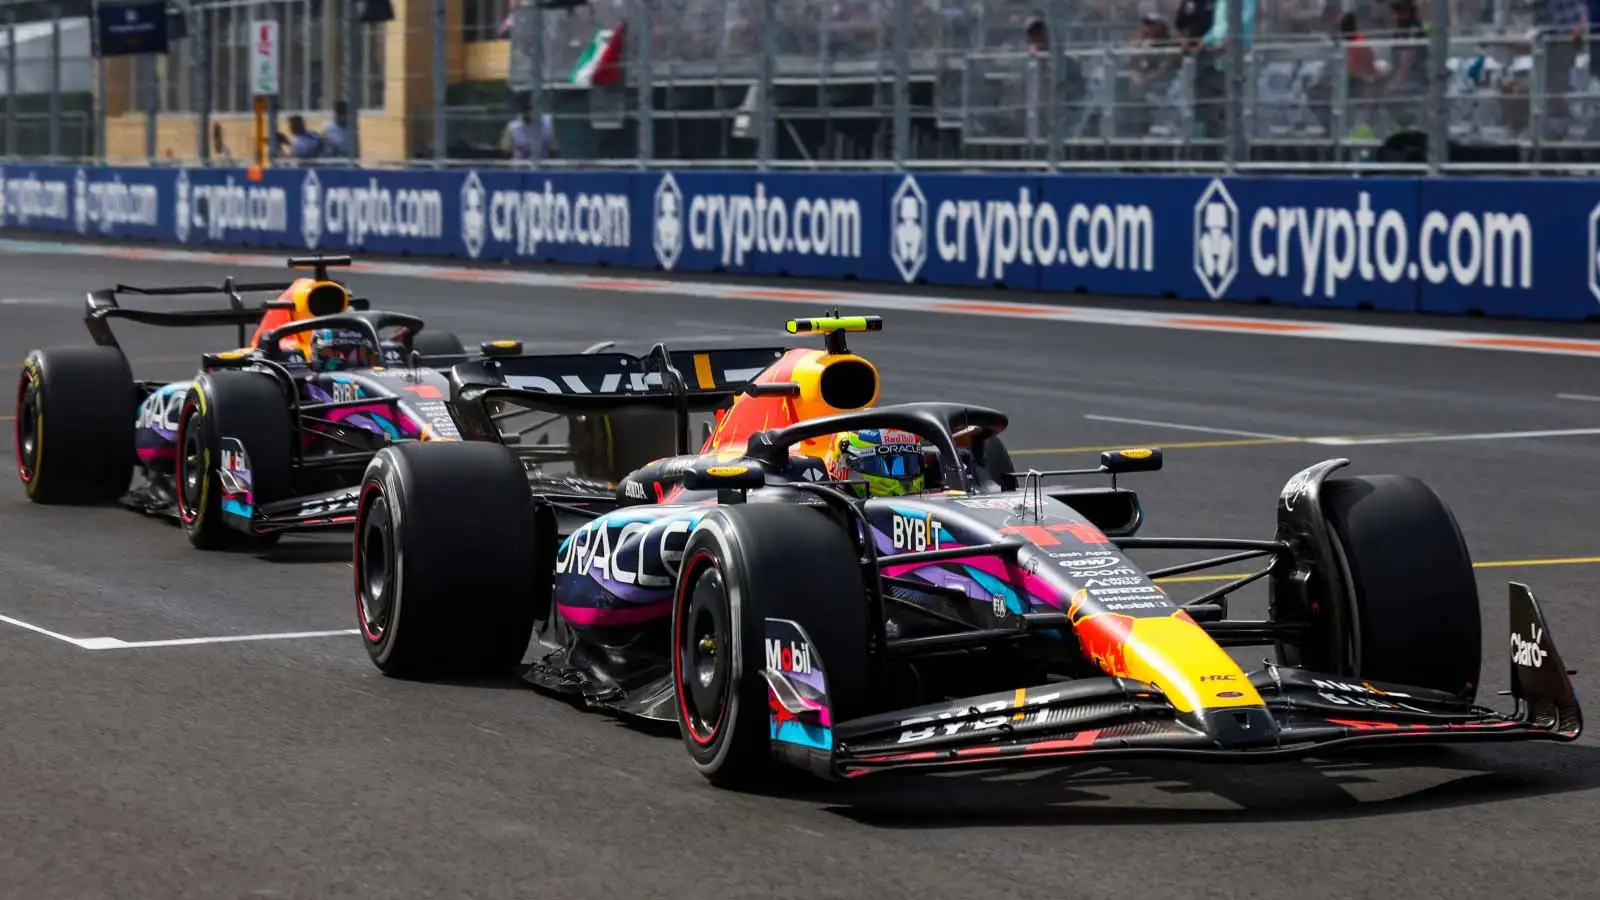 Sergio Perez with Max Verstappen behind in the race. Miami May 2023.